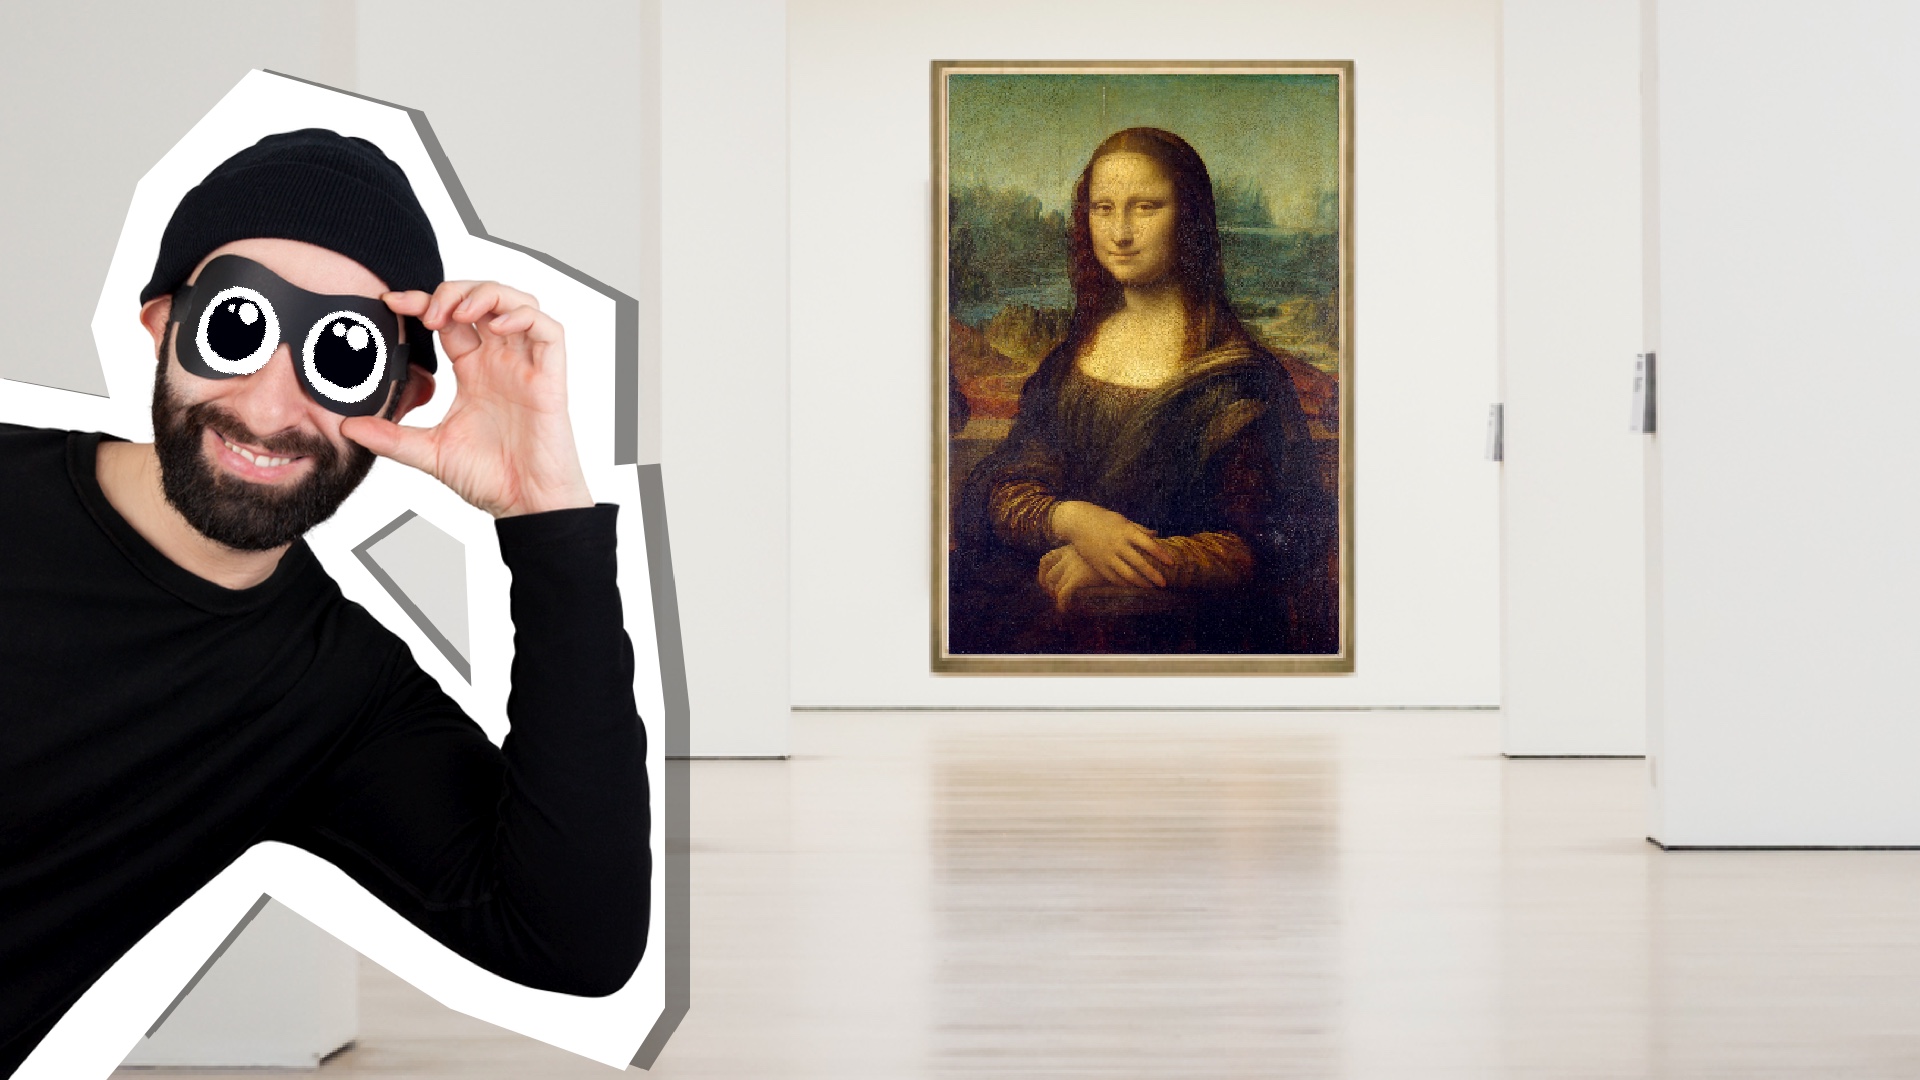 The Mona Lisa Painting Facts